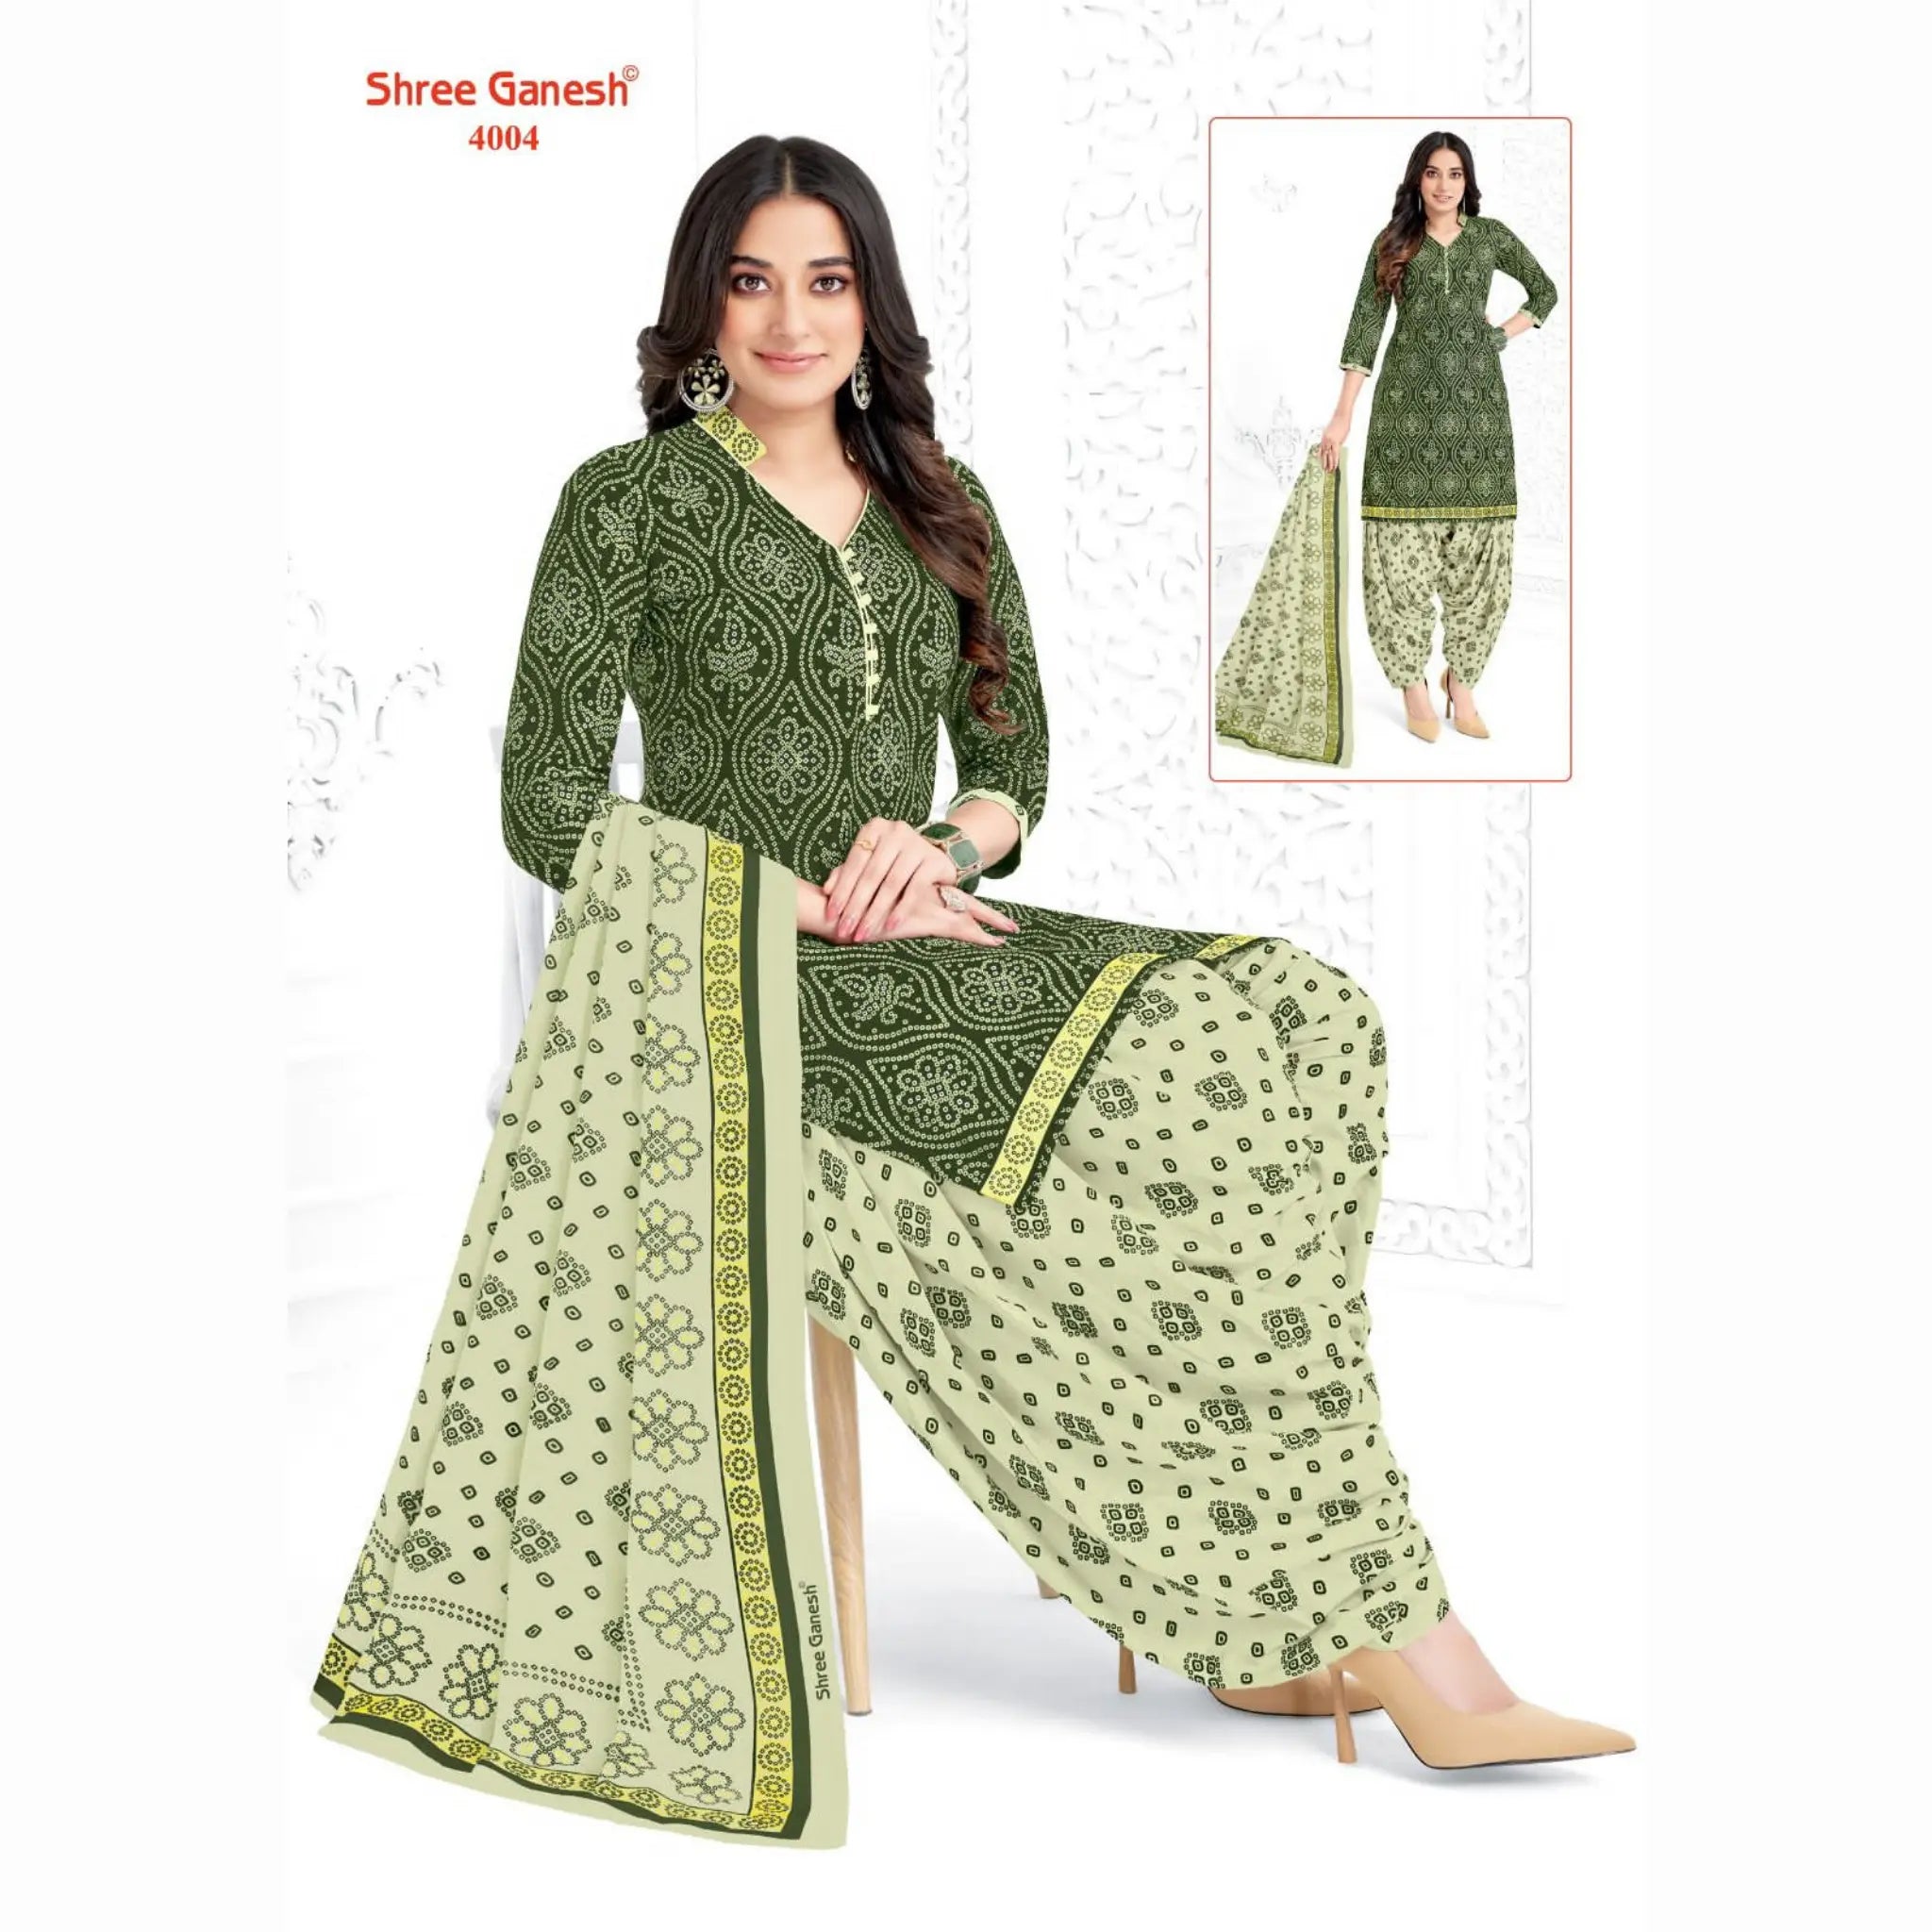 Bottle Green Printed Kurti with Green Mist Patiala Pant and Dupatta - Cotton Fabric